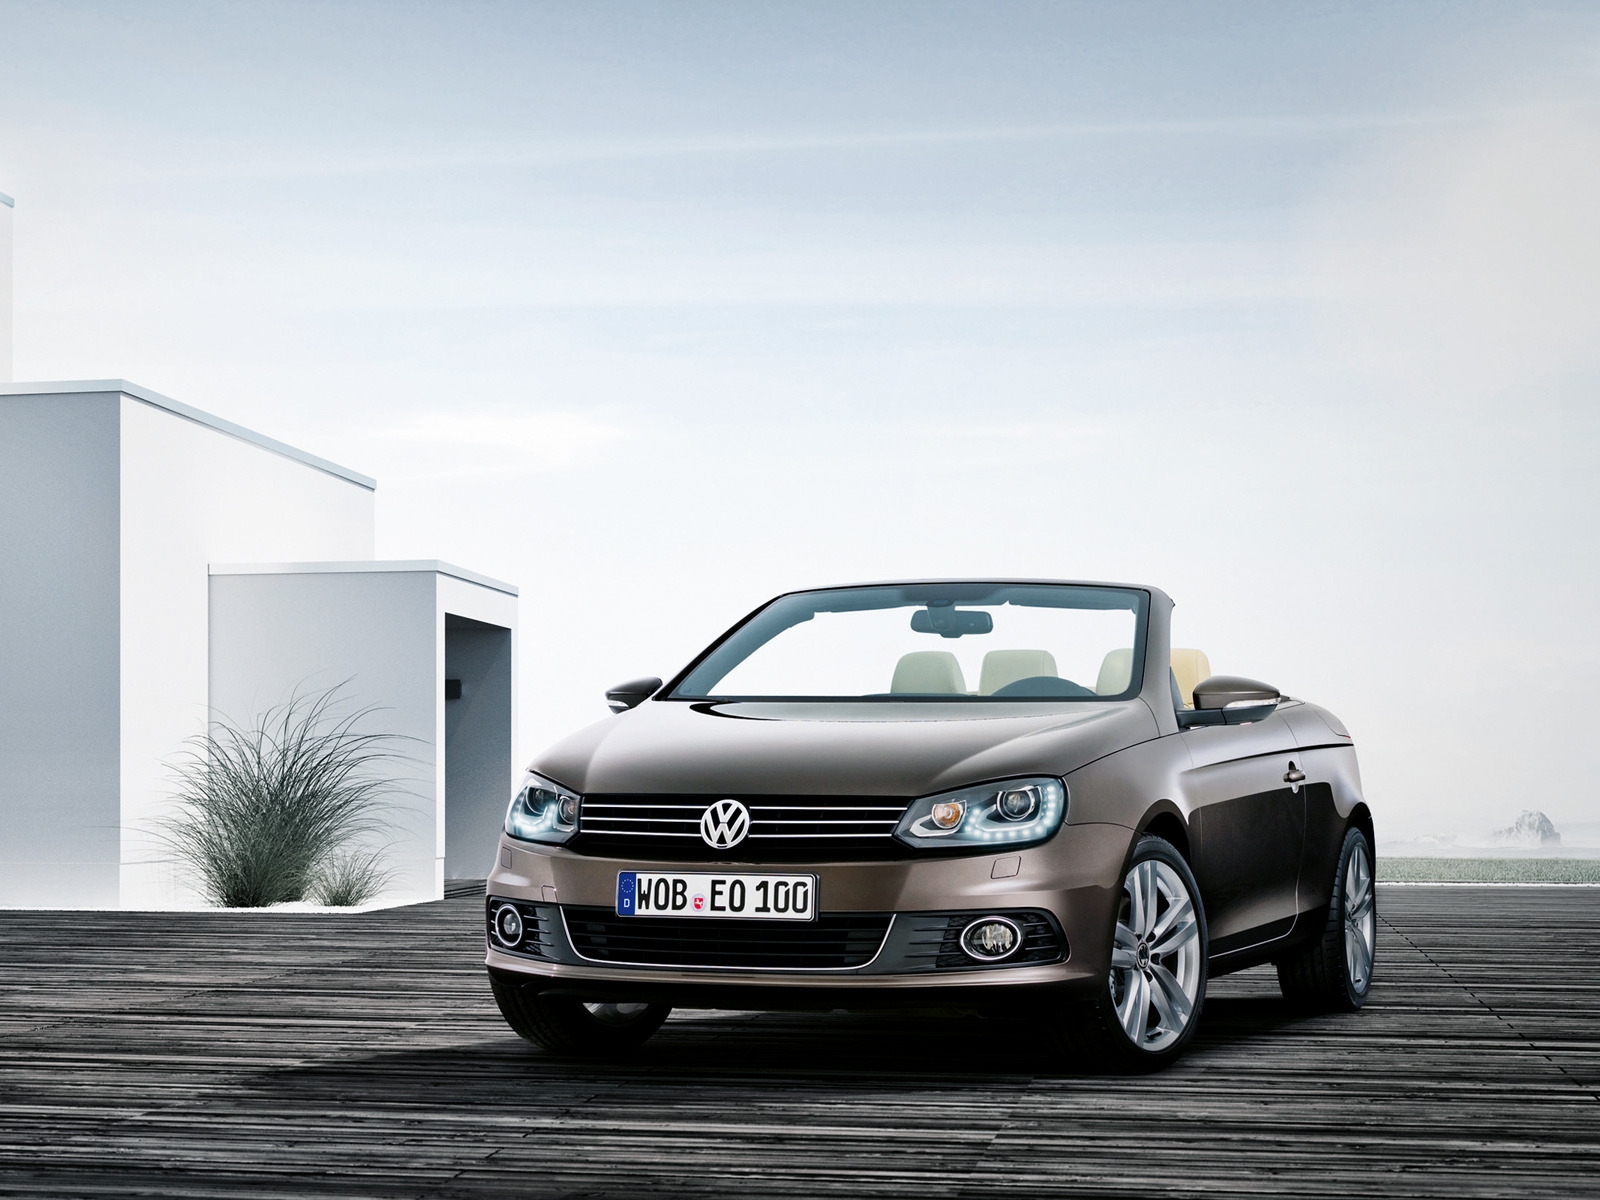 VW Eos 2011 for 1600 x 1200 resolution